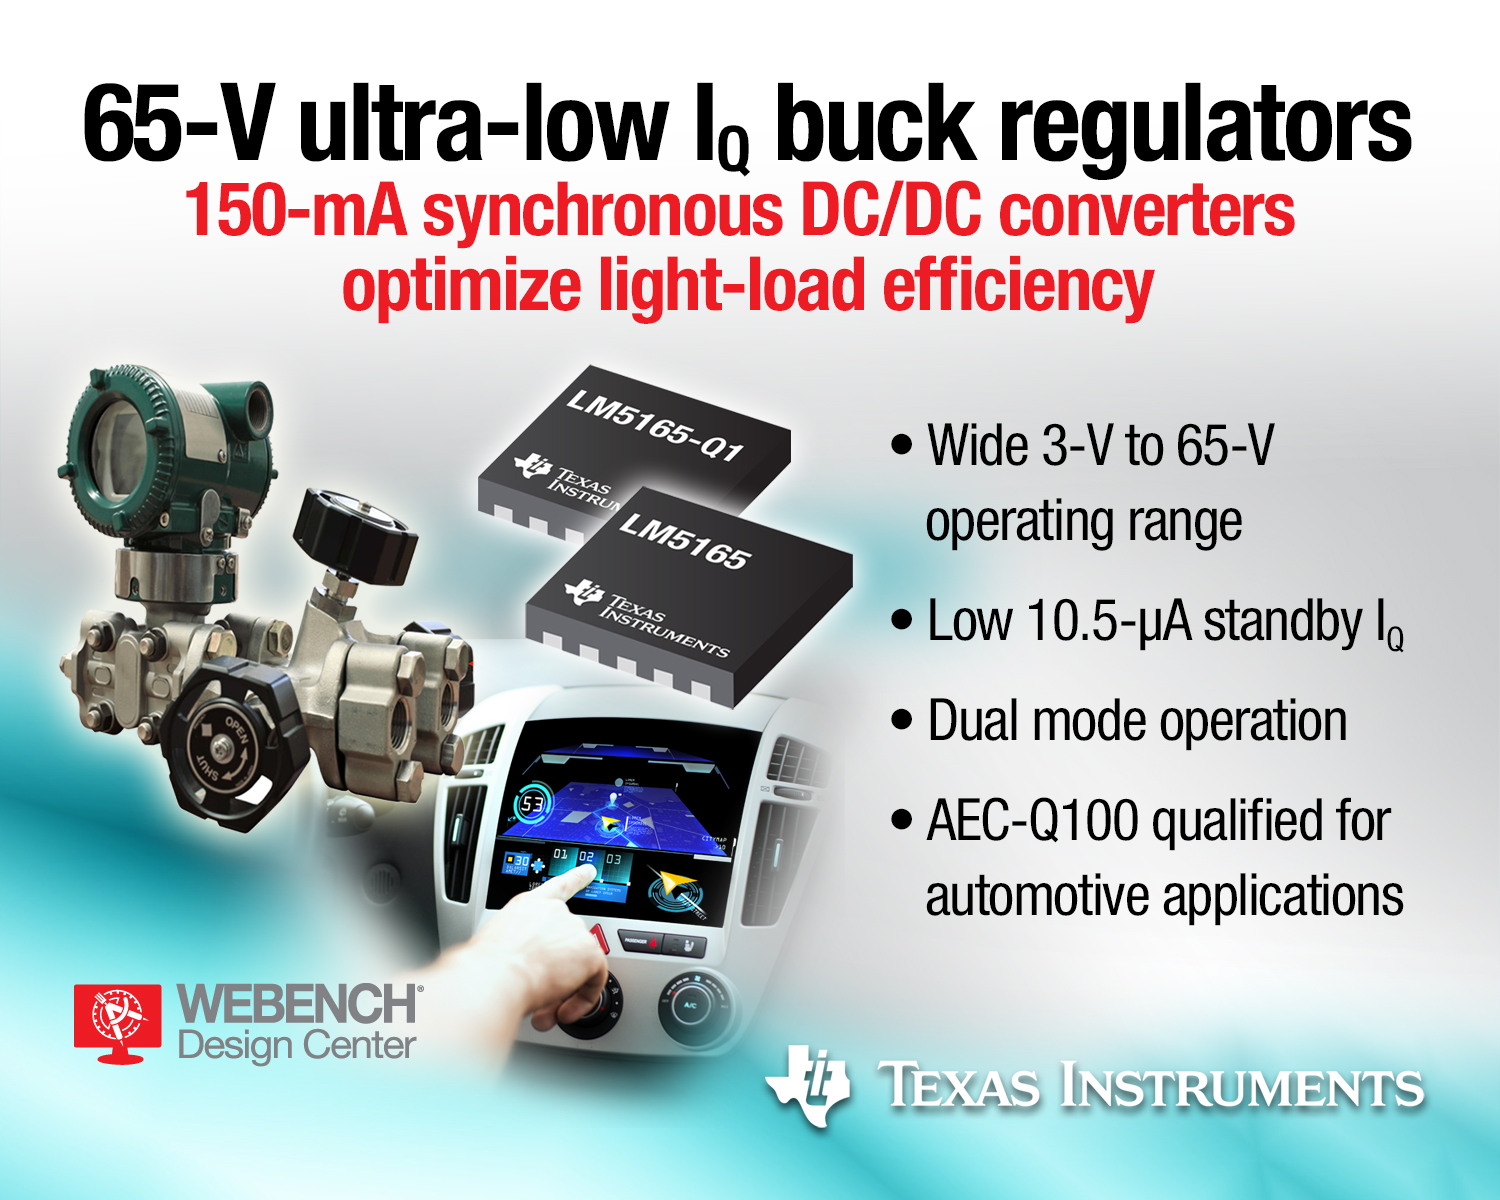 TI’s 65-V micro-power buck converters claim industry’s lowest quiescent current